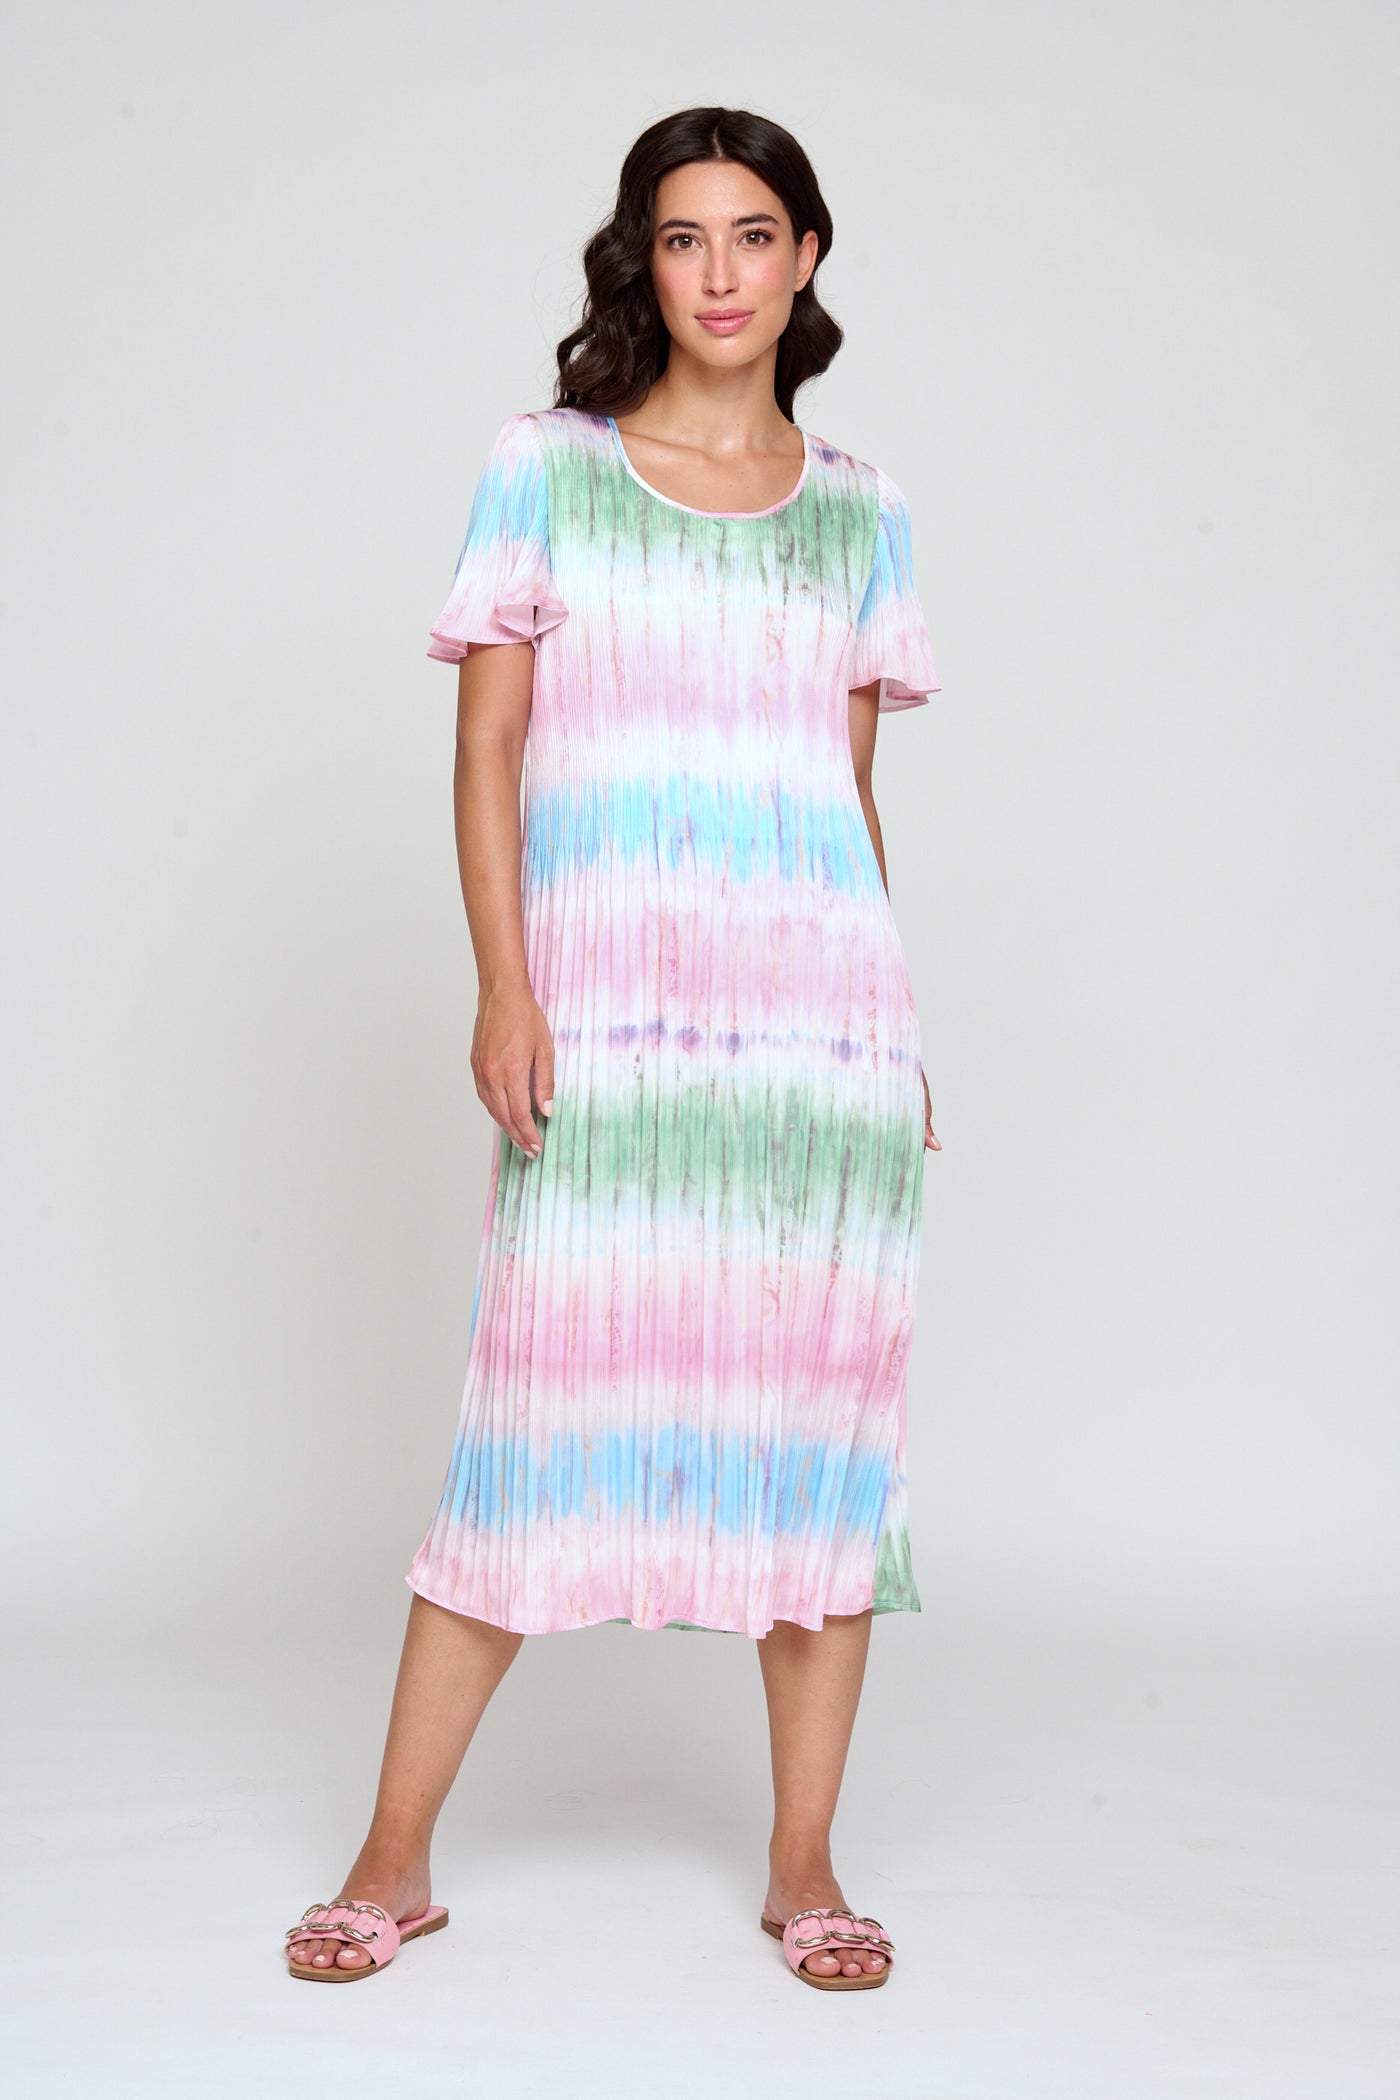 Multicolored Dress With Gradient Stripe Print And Ruffled Sleeves